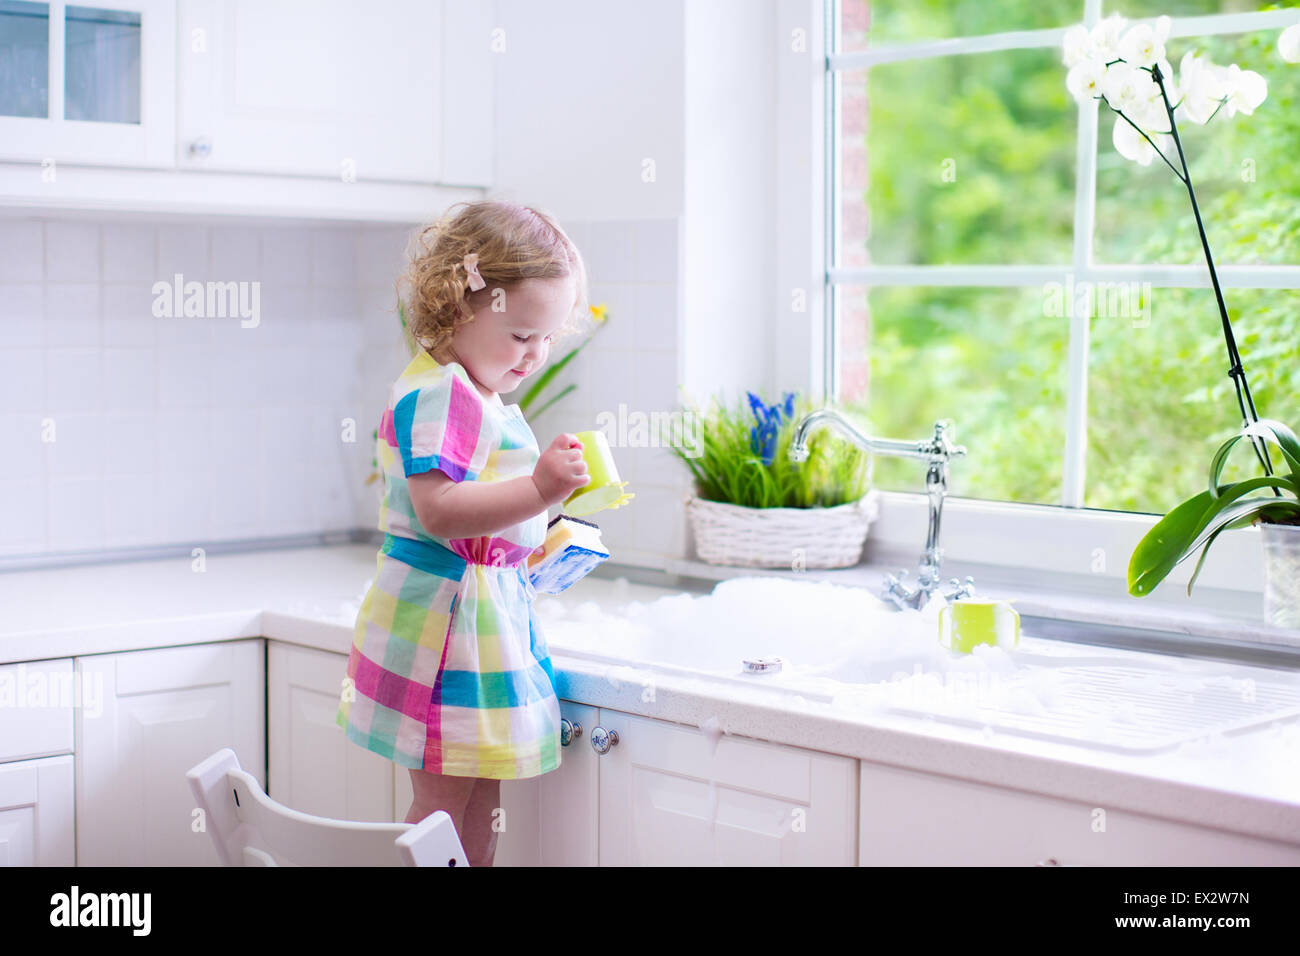 Child washing dishes. Kids wash plates and cups. Little girl helping in the kitchen playing with water and foam in a white sink  Stock Photo